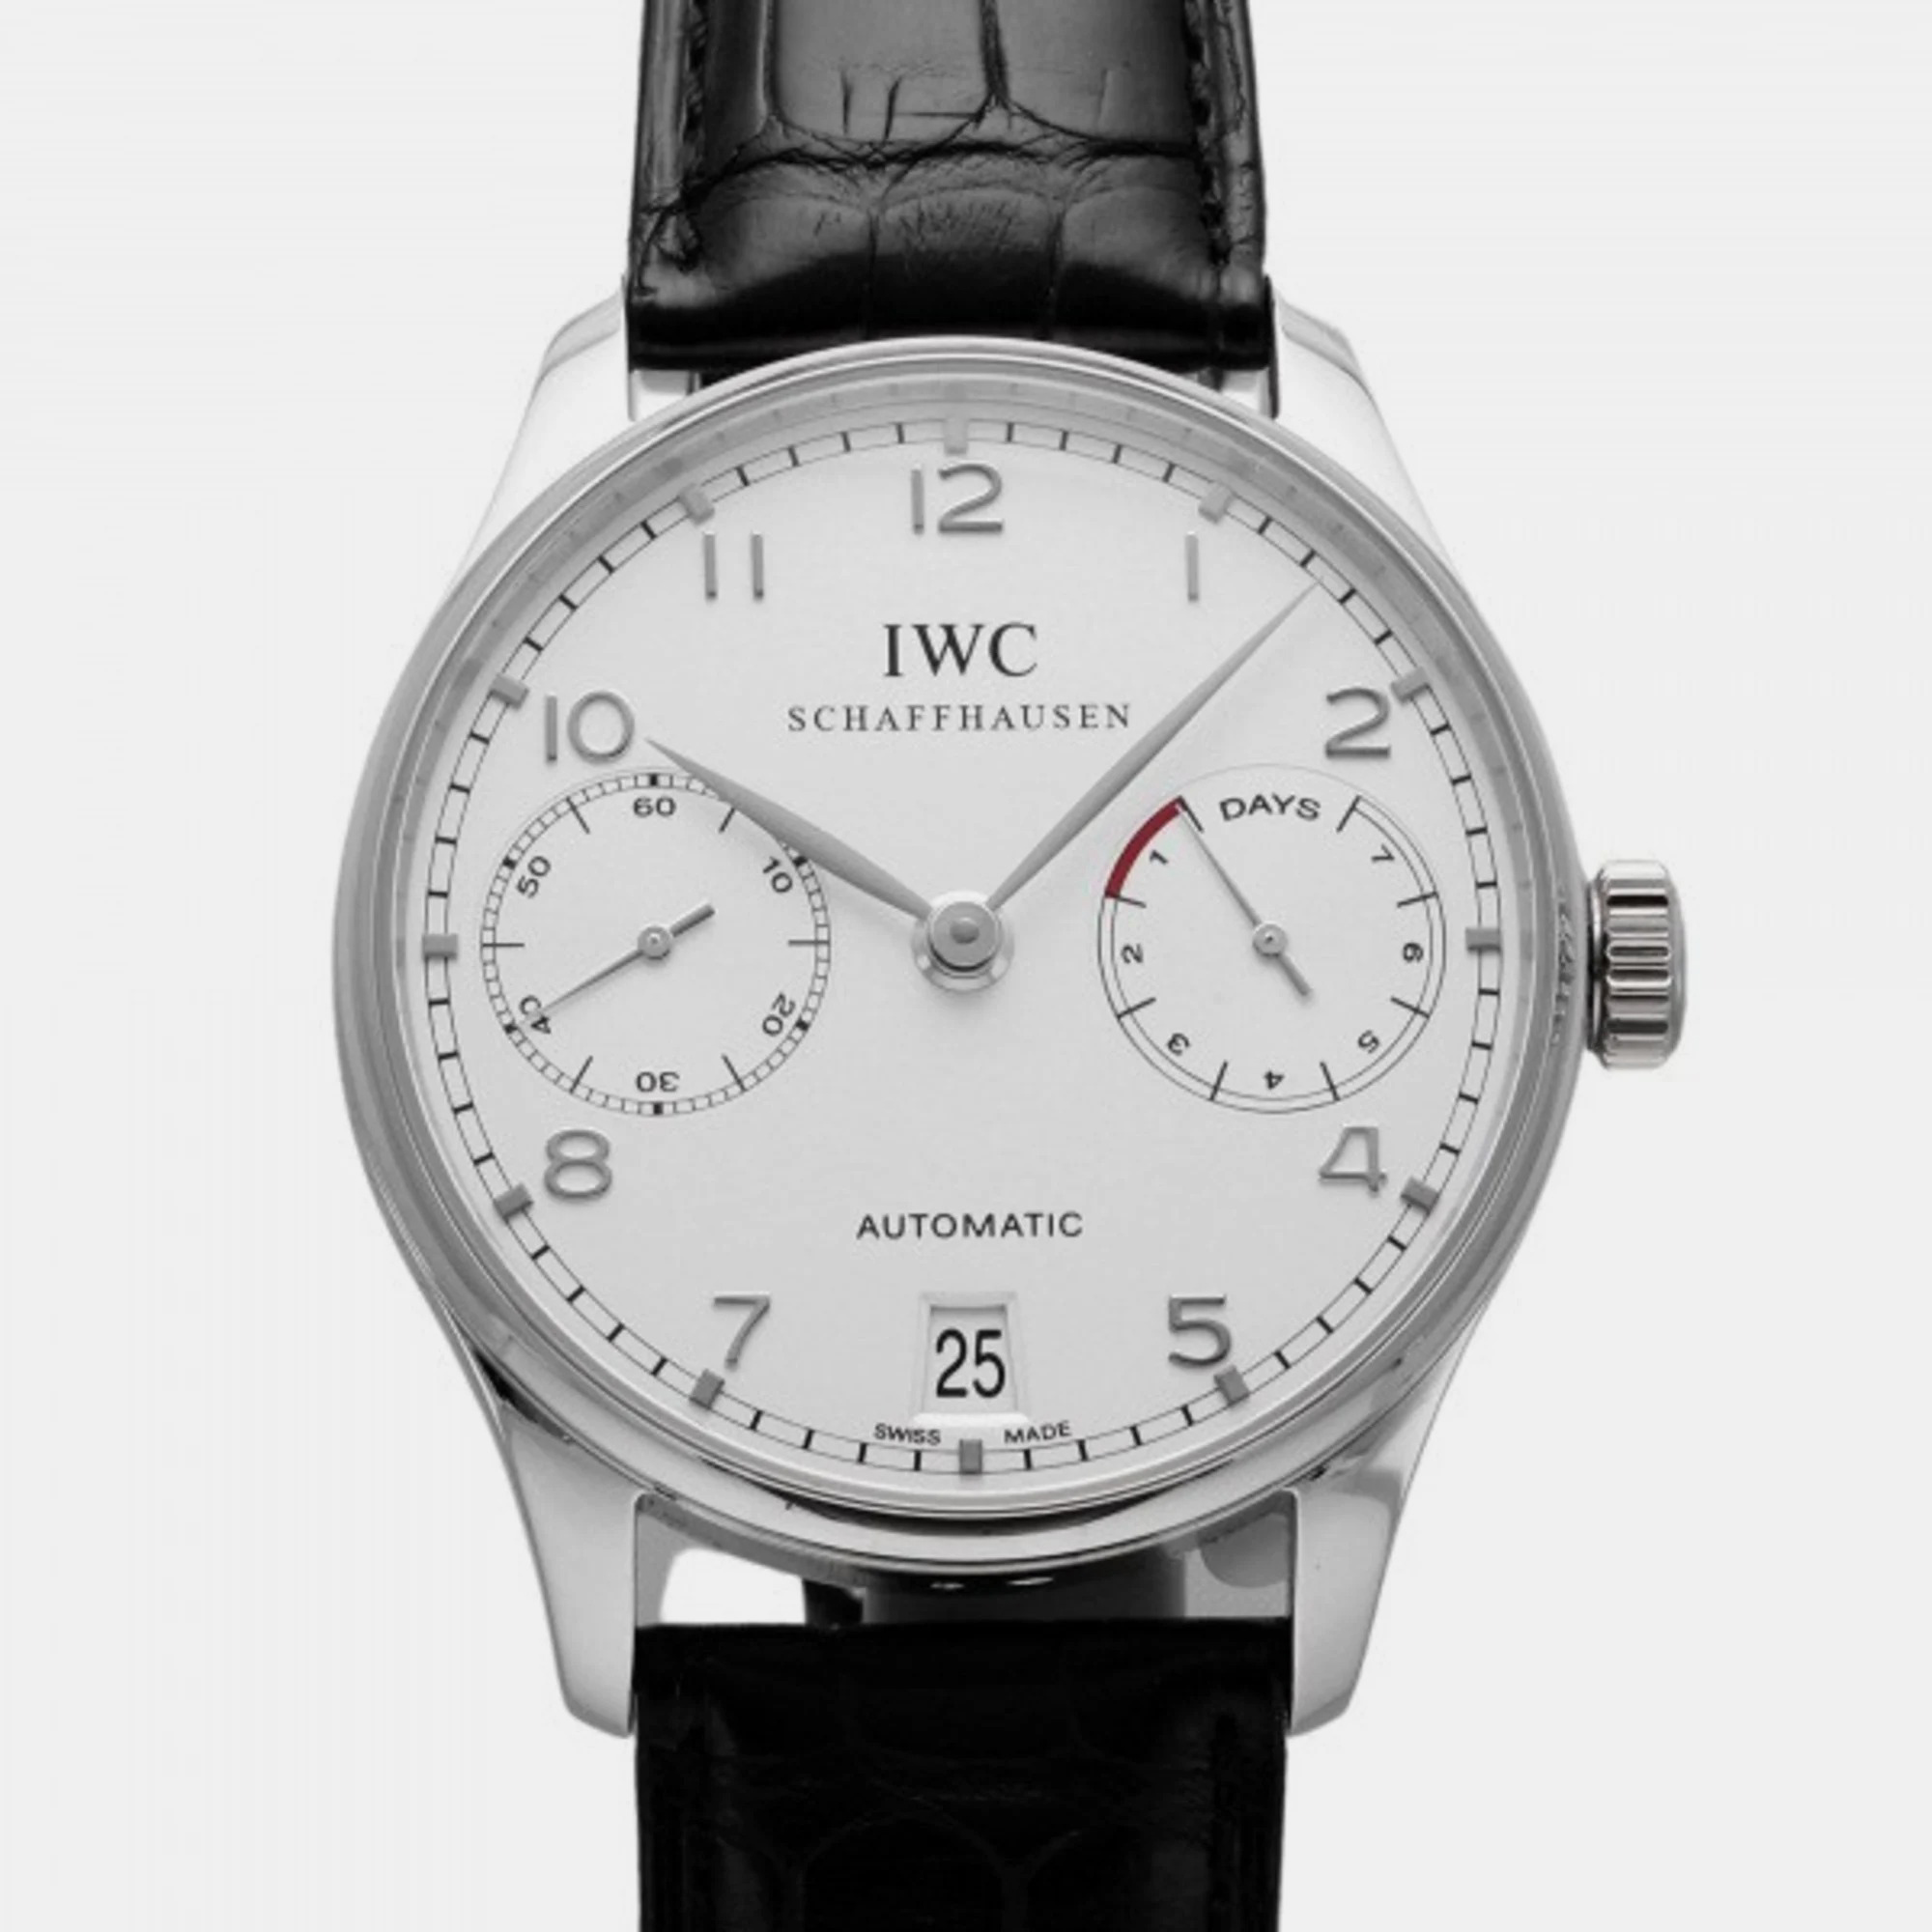 This IWC luxury watch is characterized by skillful craftsmanship and understated charm. Meticulously constructed to tell time in an elegant way it comes in a sturdy case and flaunts a seamless blend of innovative design and flawless style.